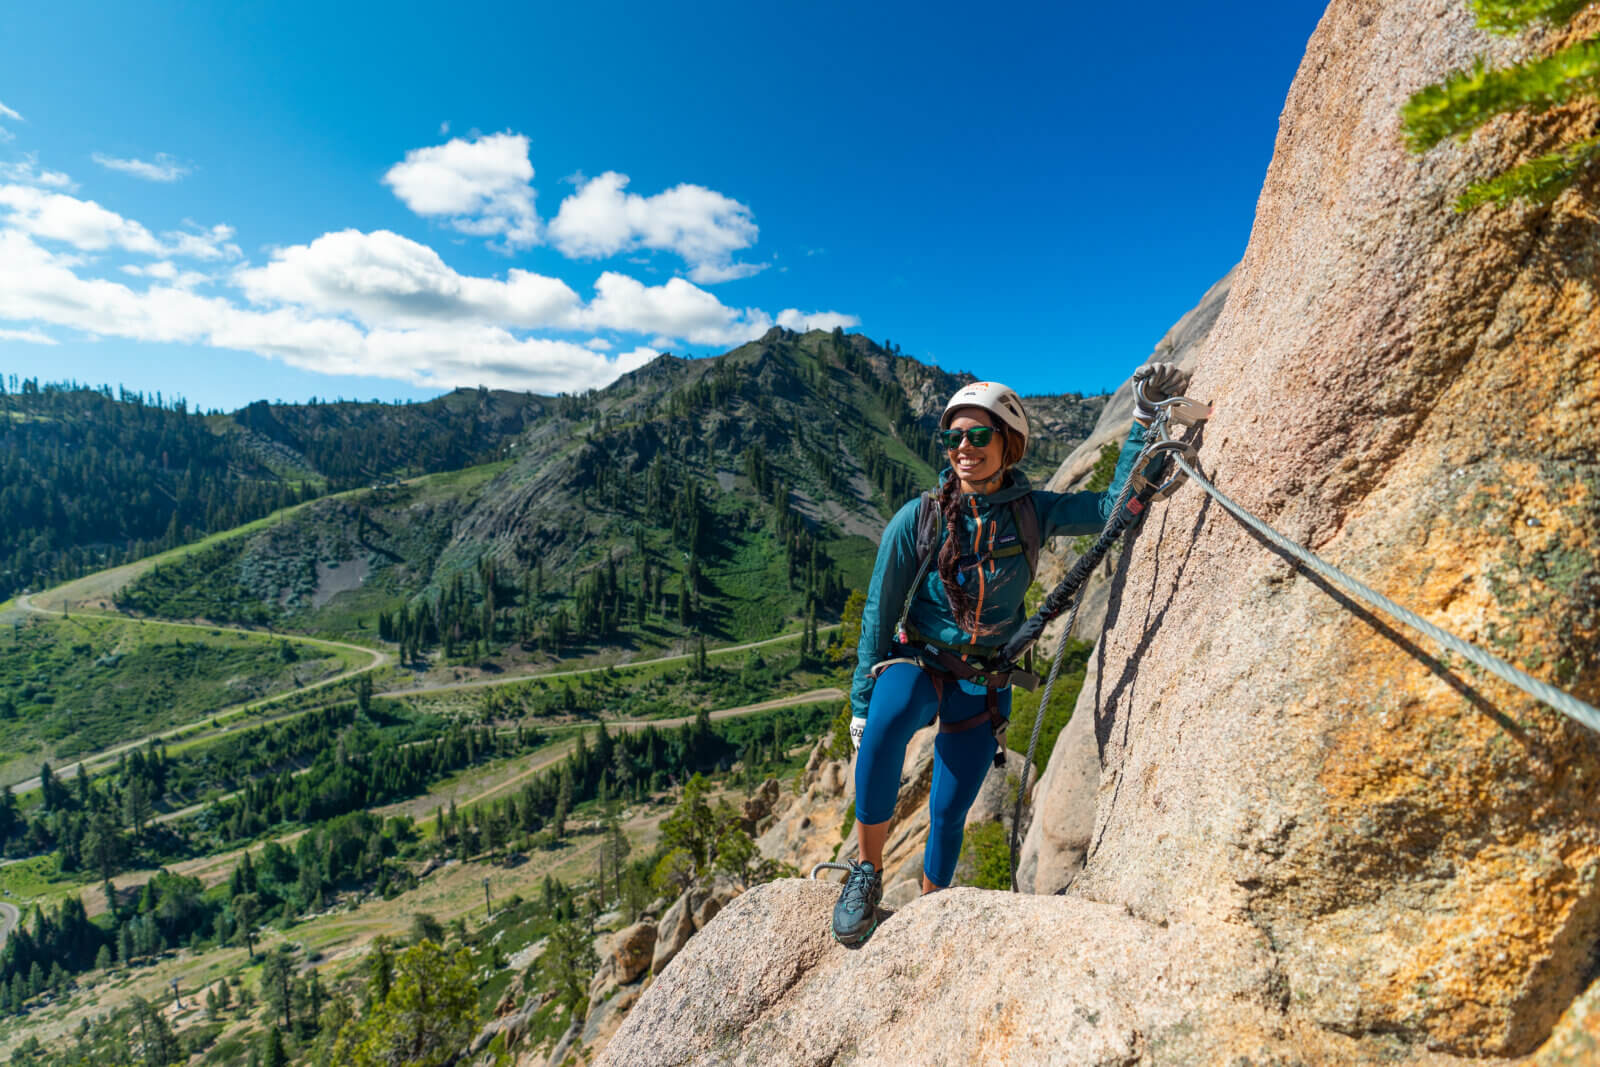 A female climber on the Tahoe Via Ferrata overlooking Palisades Tahoe and Olympic Valley, CA. One of the best Lake Tahoe adventures!